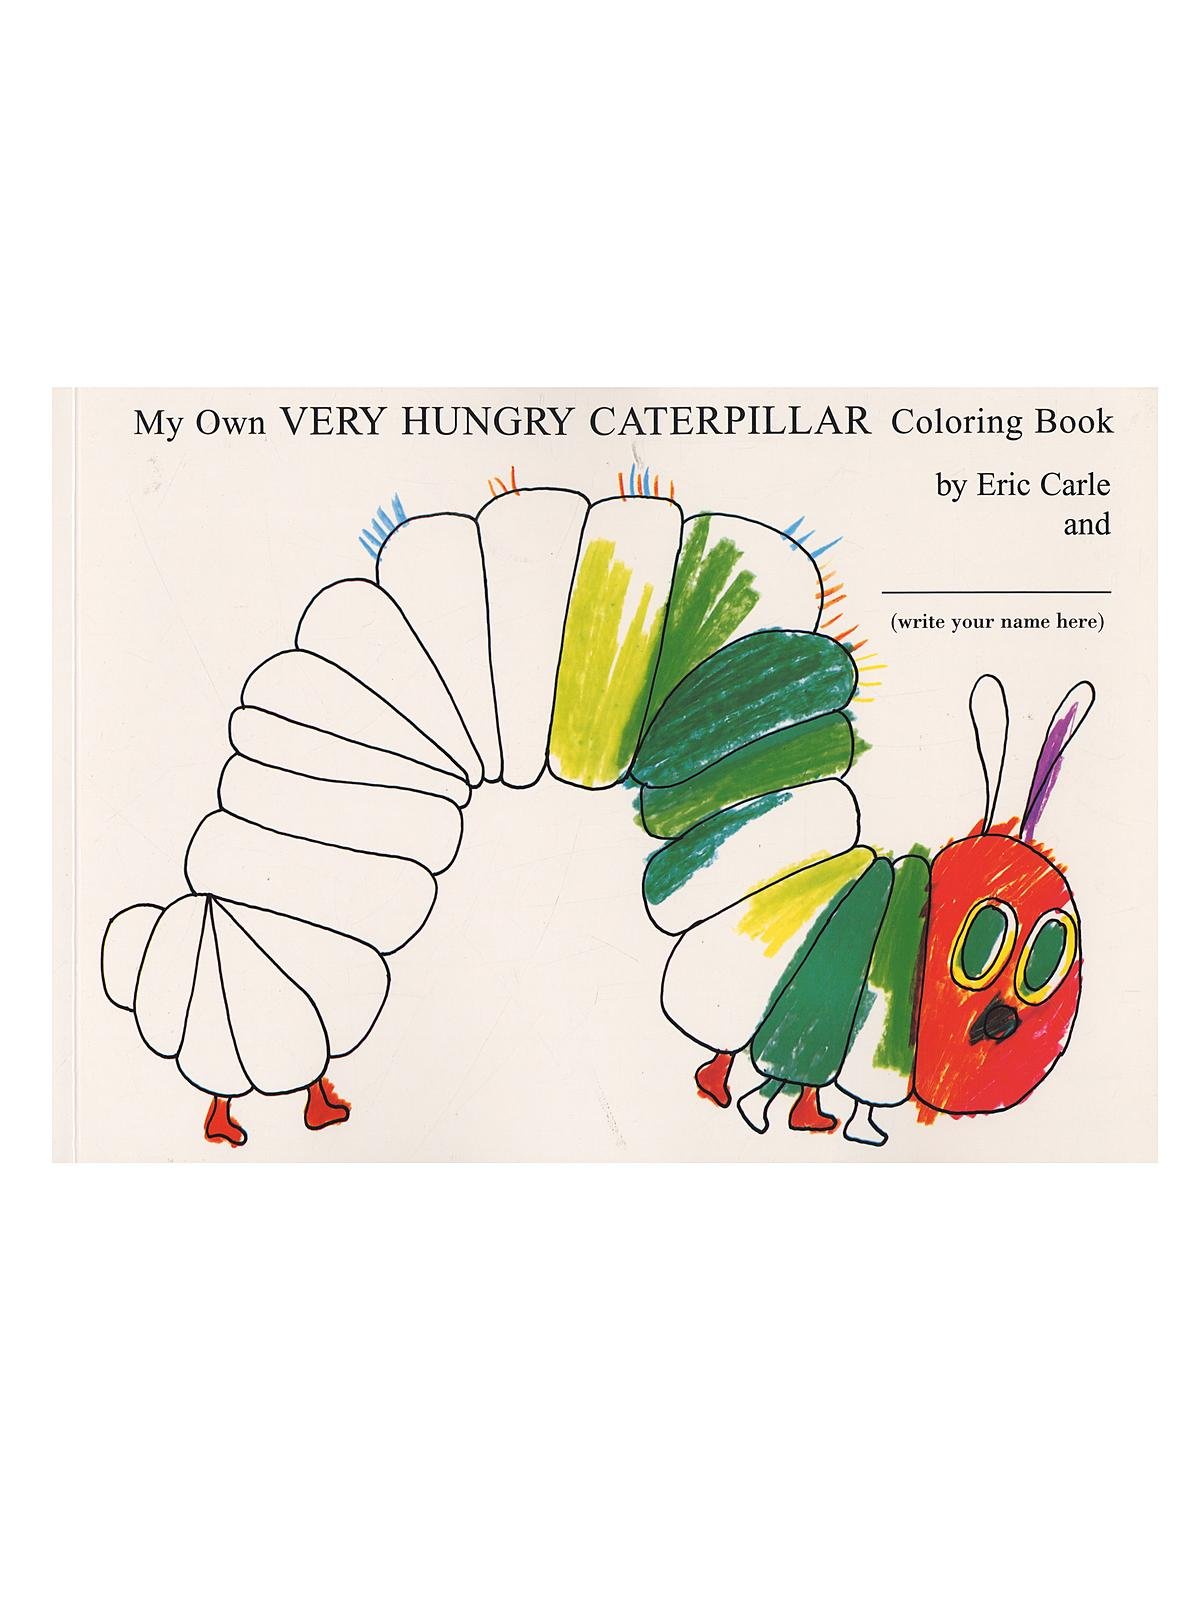 My Own Very Hungry Caterpillar